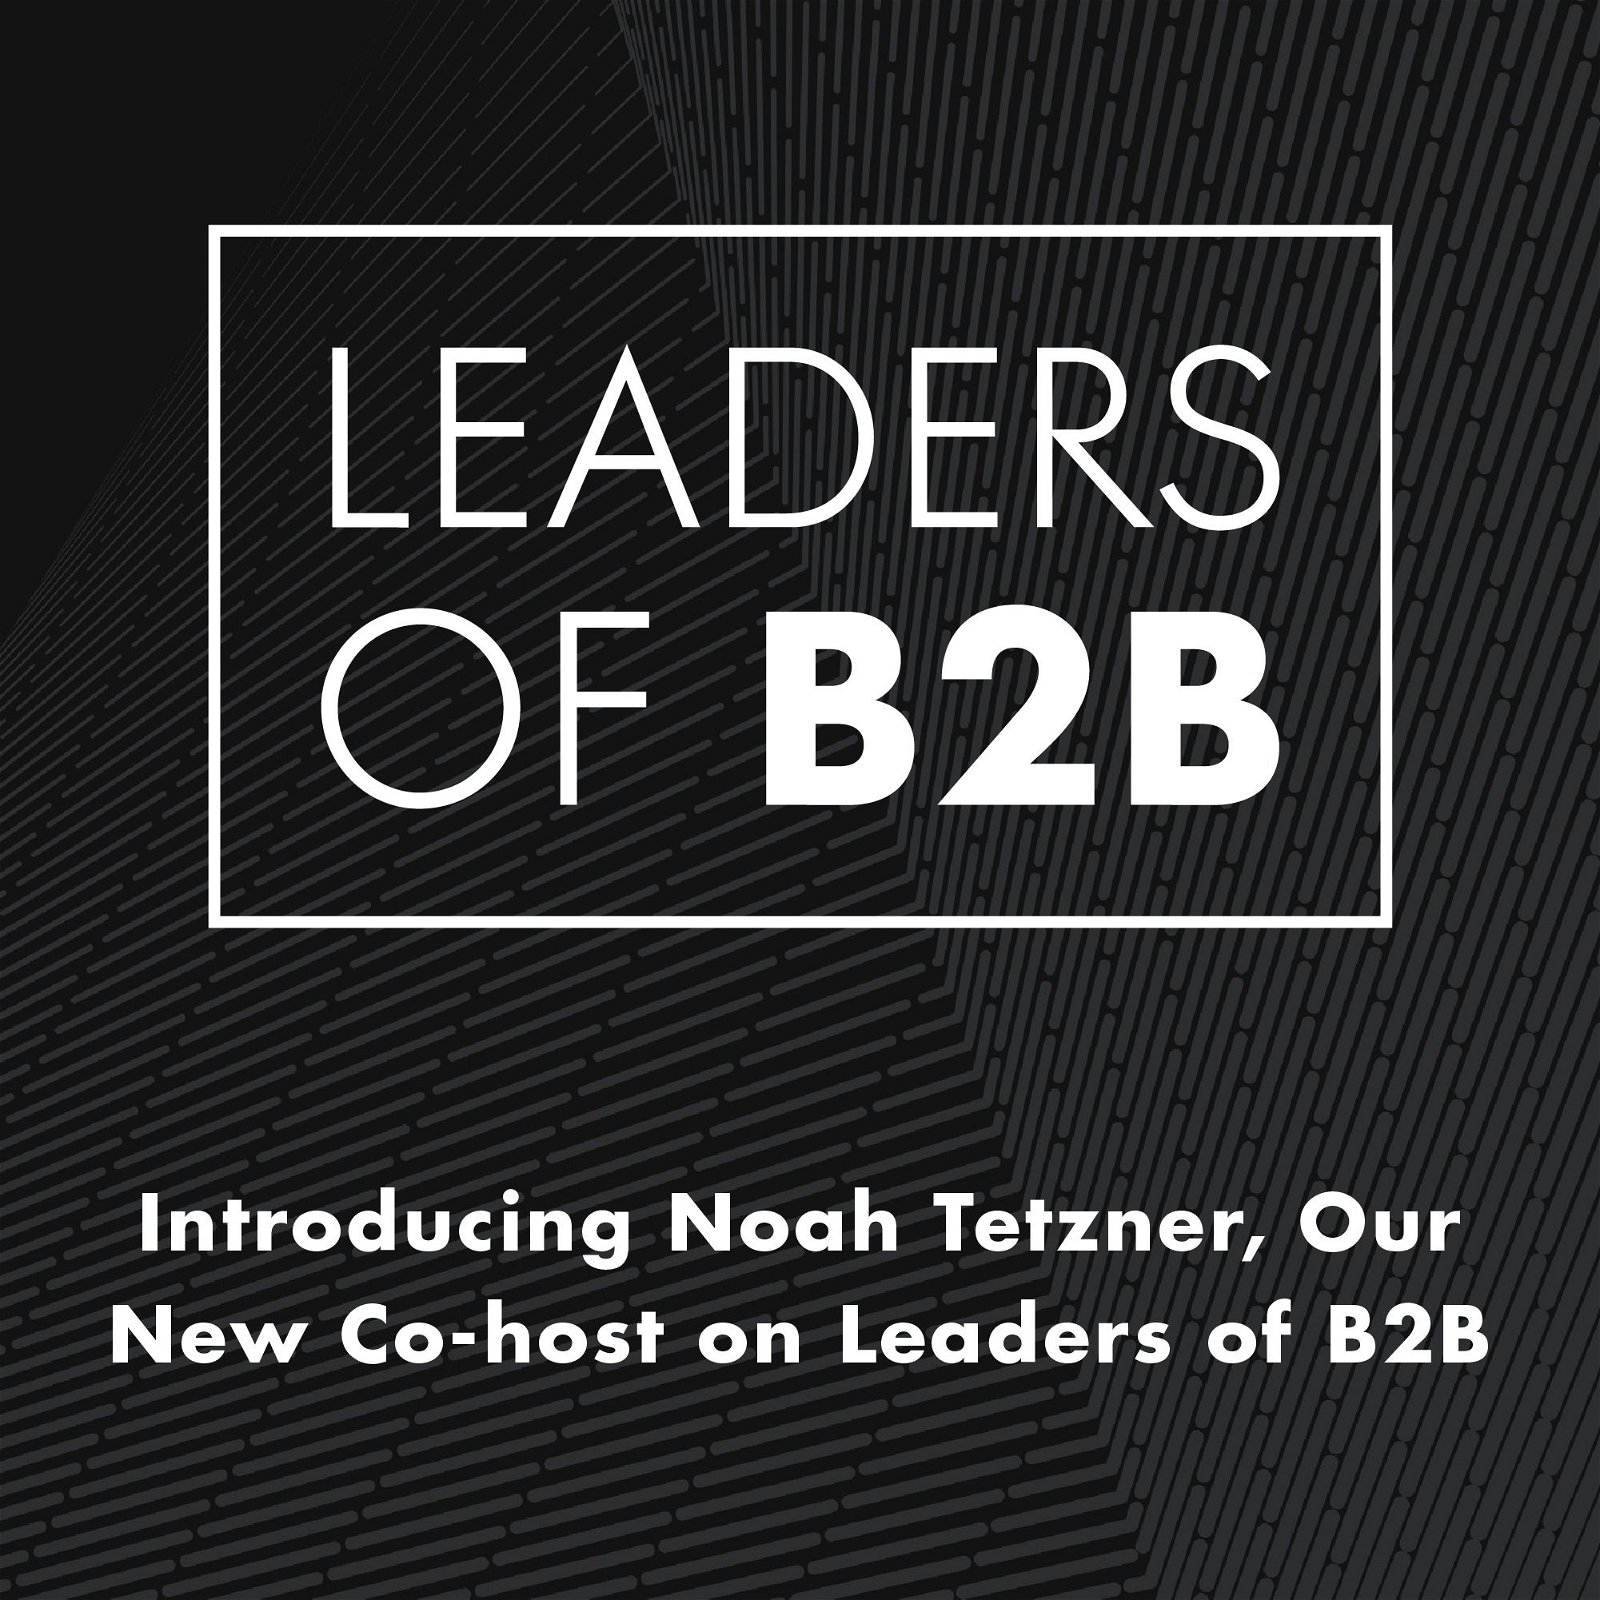 Introducing Noah Tetzner, Our New Co-host on Leaders of B2B